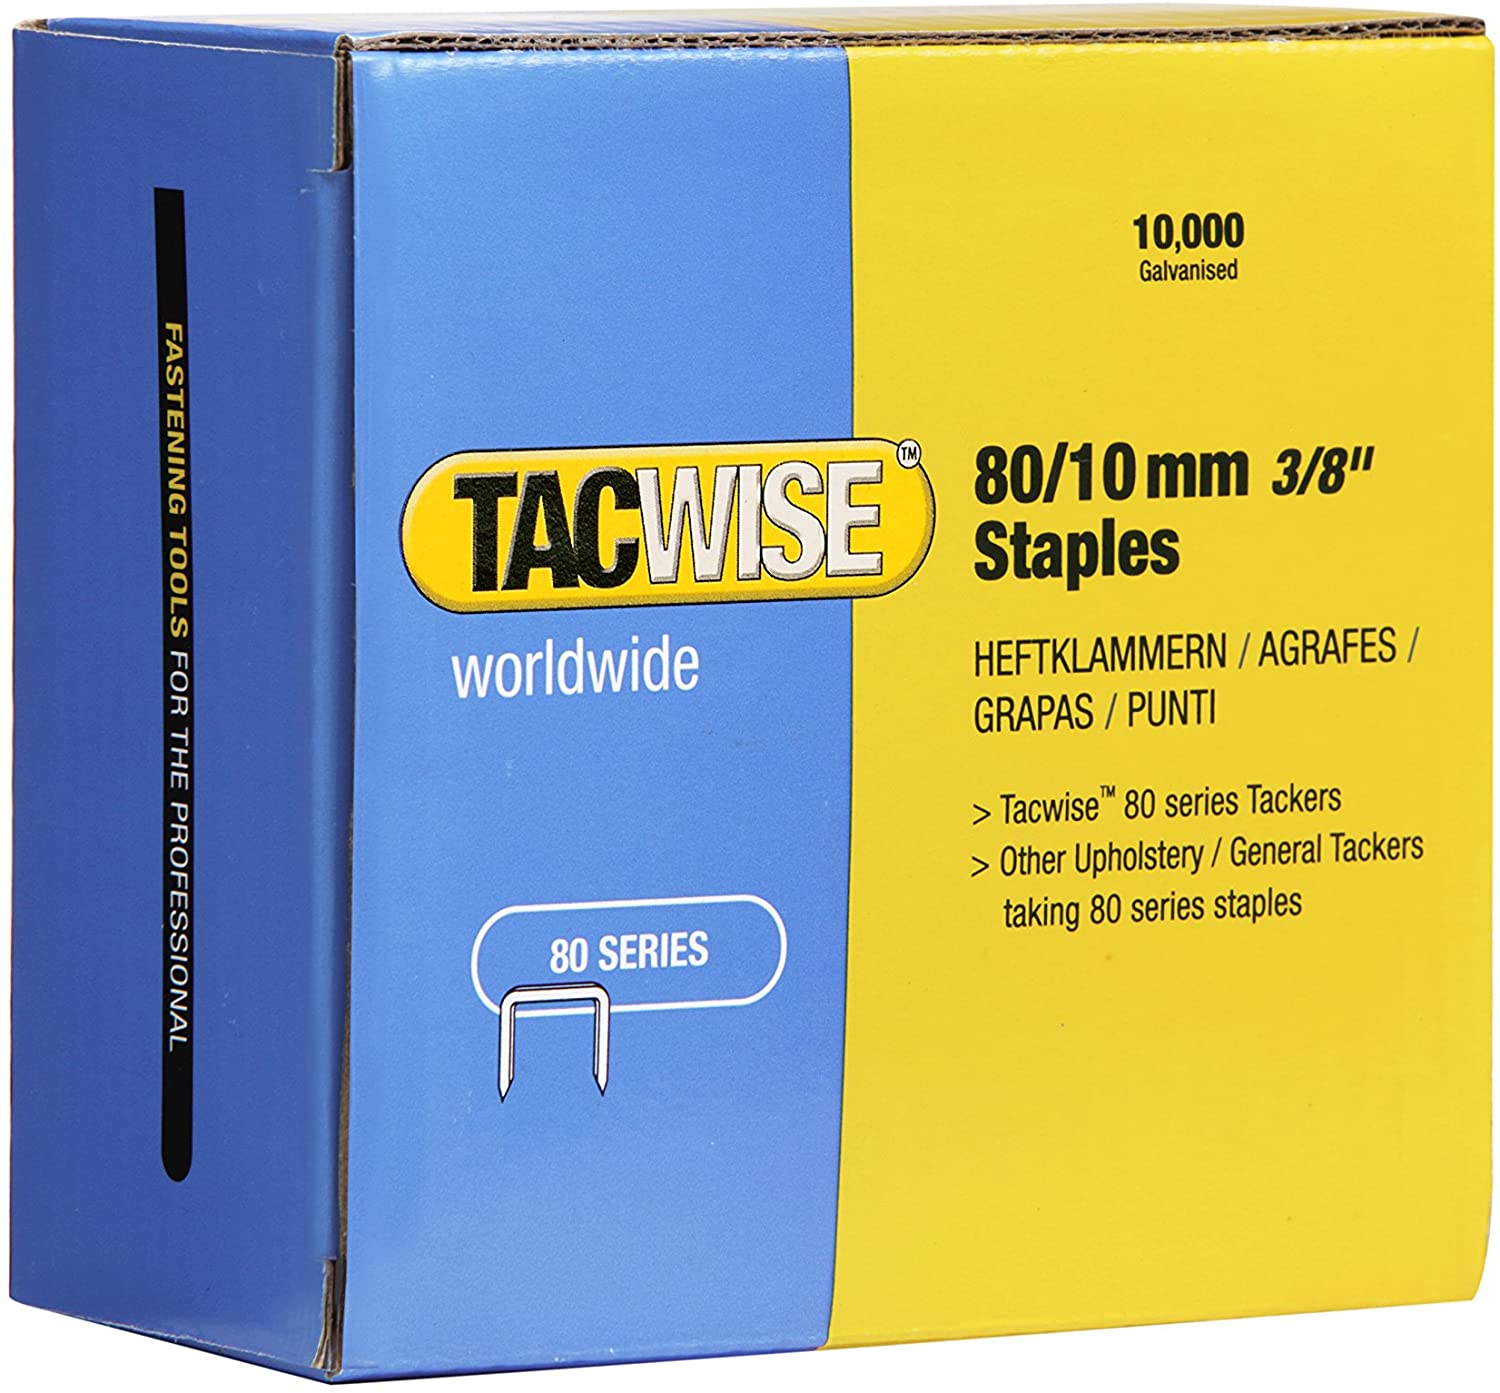 Tacwise 0380 Type 80 / 4 mm Galvanised Upholstery Staples, Pack of 10,000